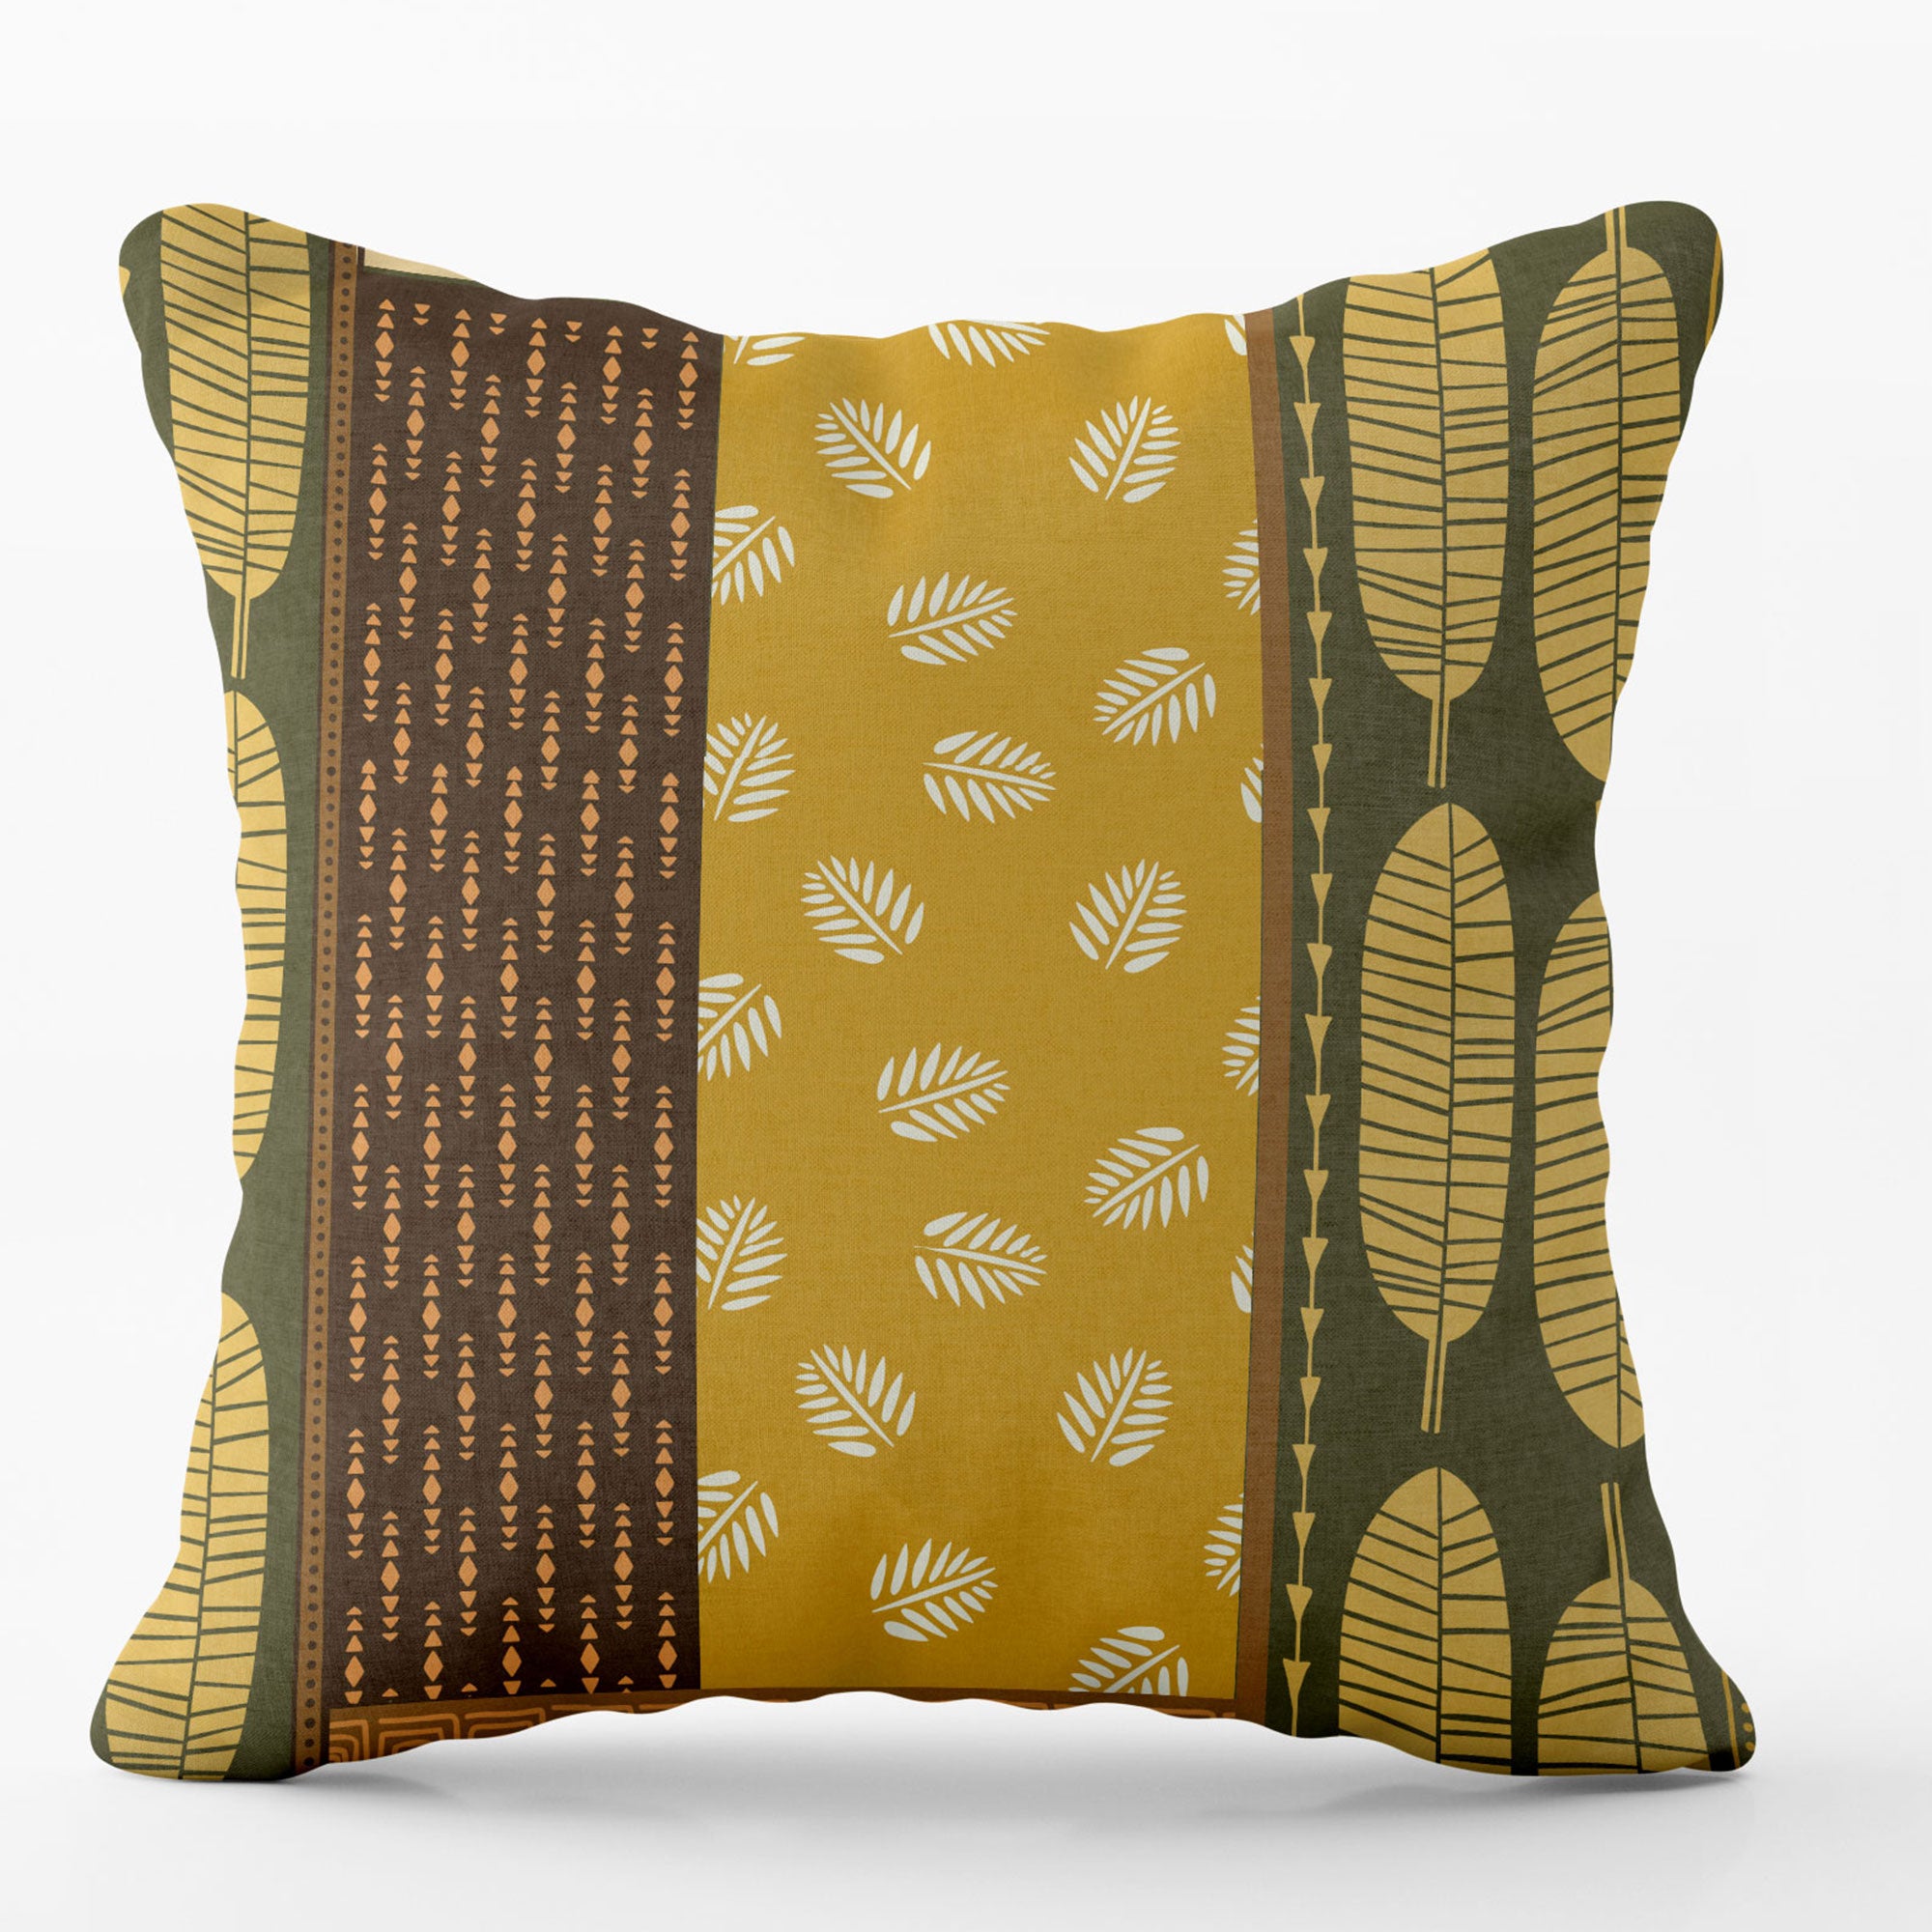 Listless Summer Afternoon Printed Pillow Cover